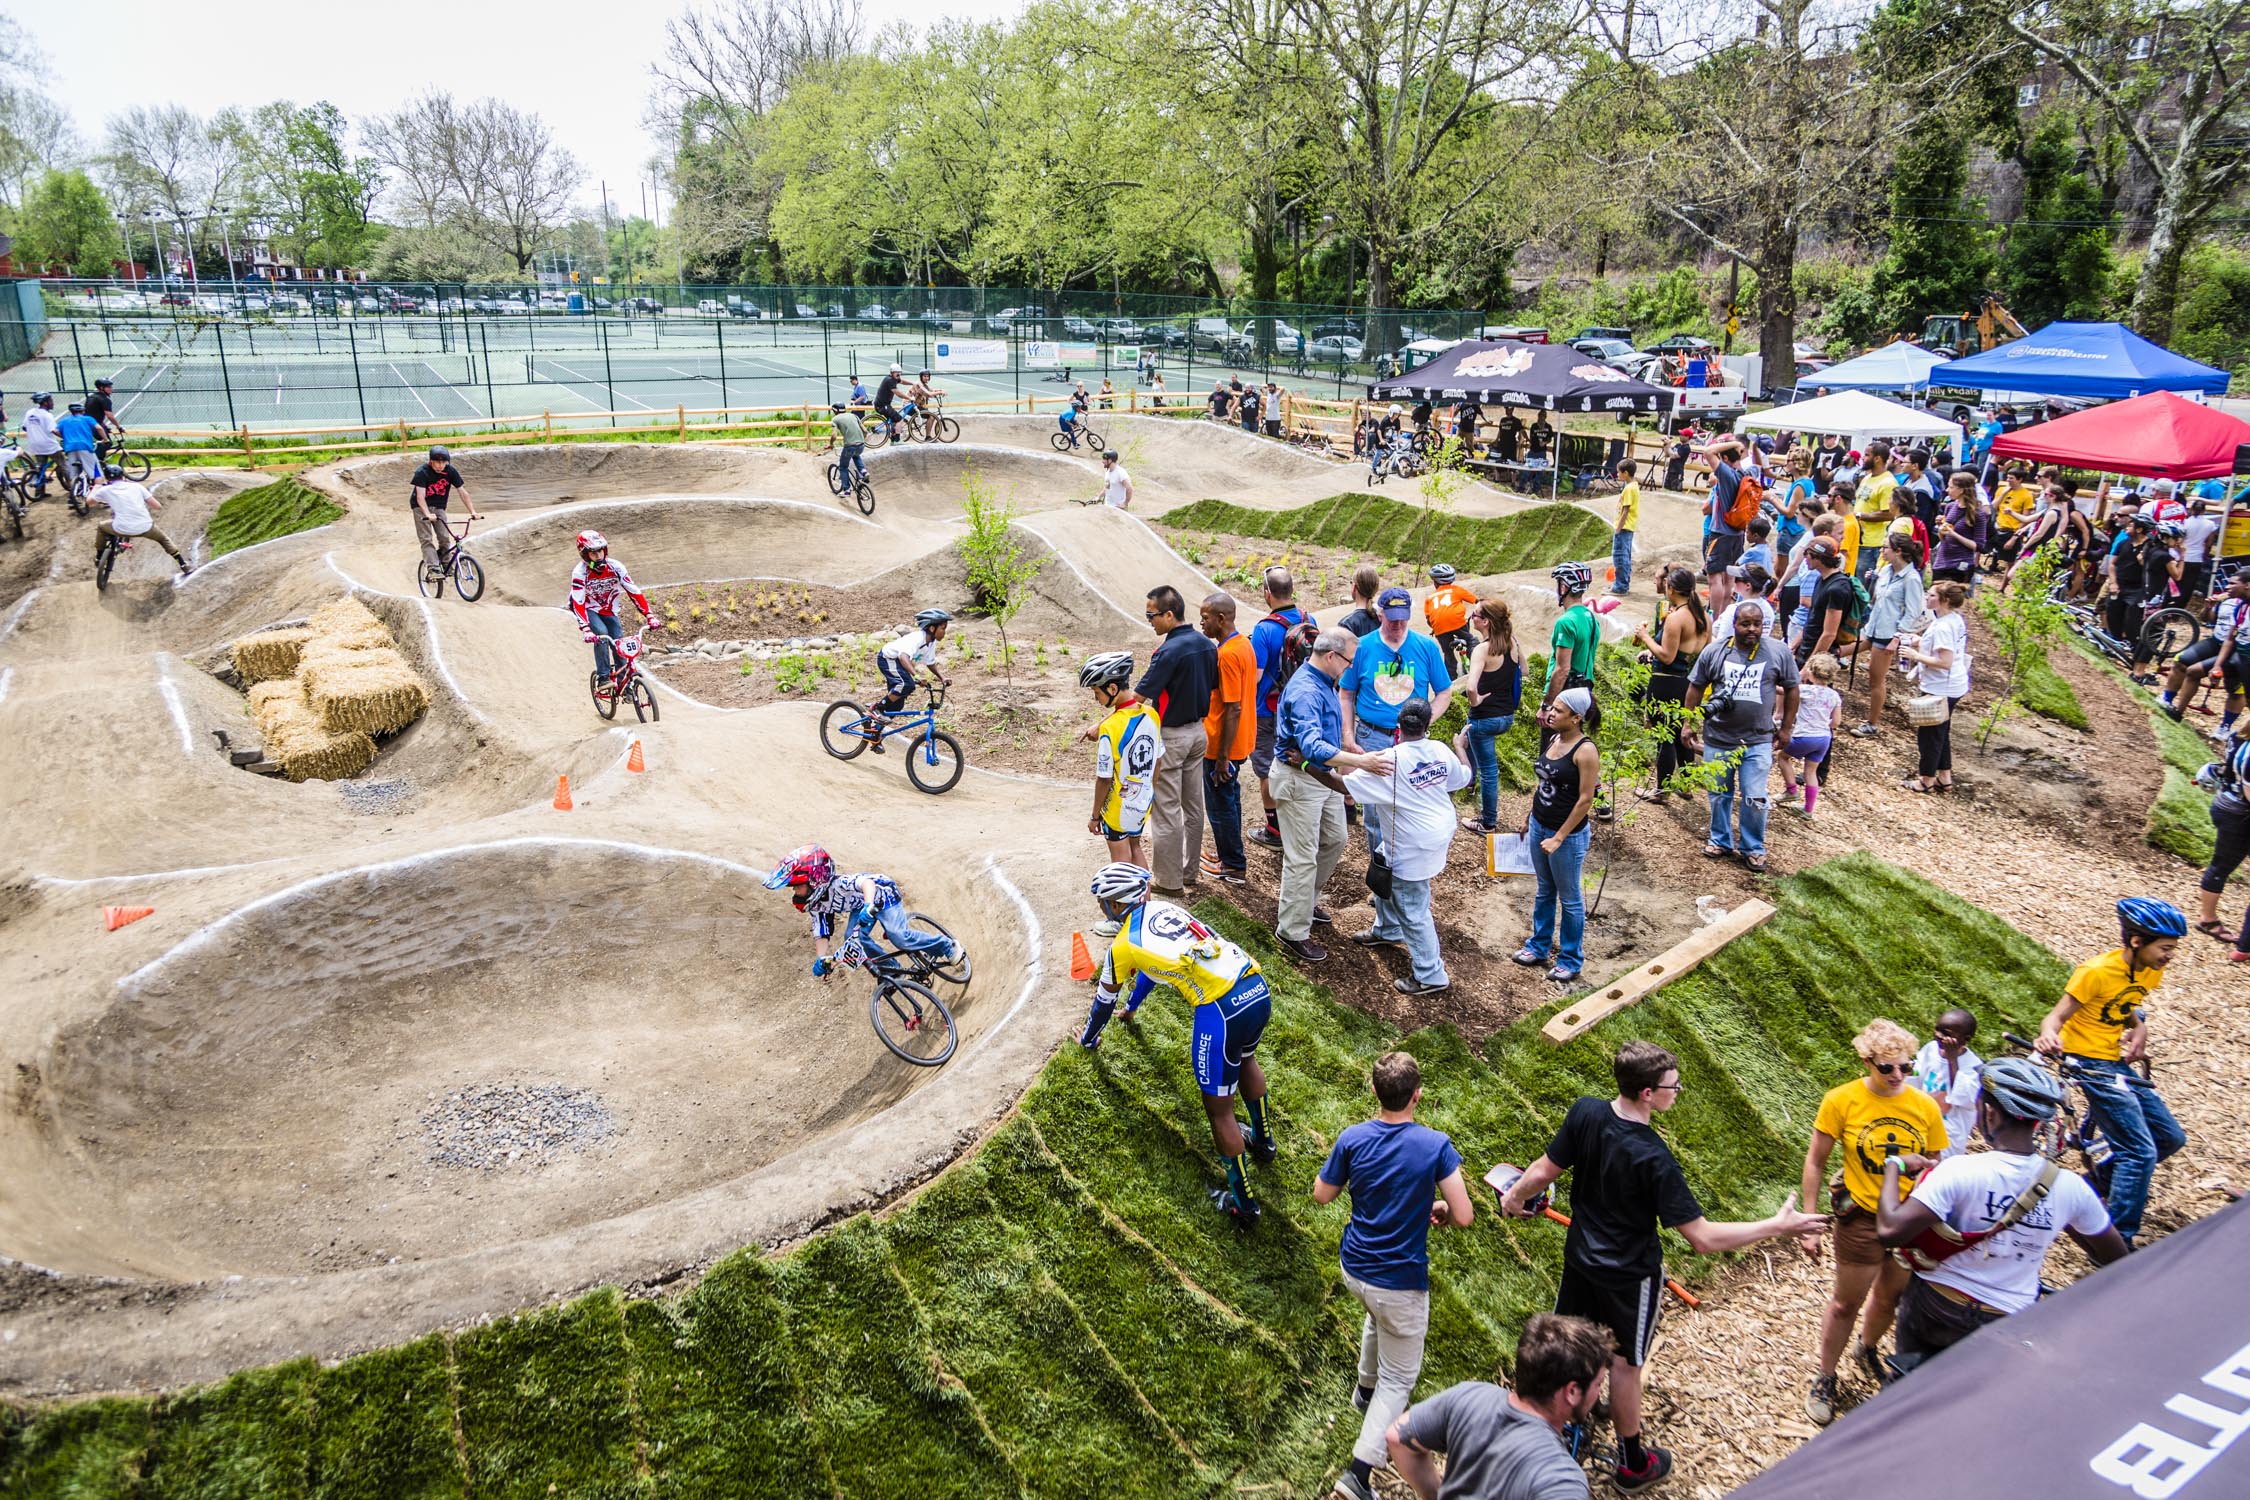 Pump track funded by a PeopleForBikes Community Grant in Philadelphia. Photo: PeopleForBikes